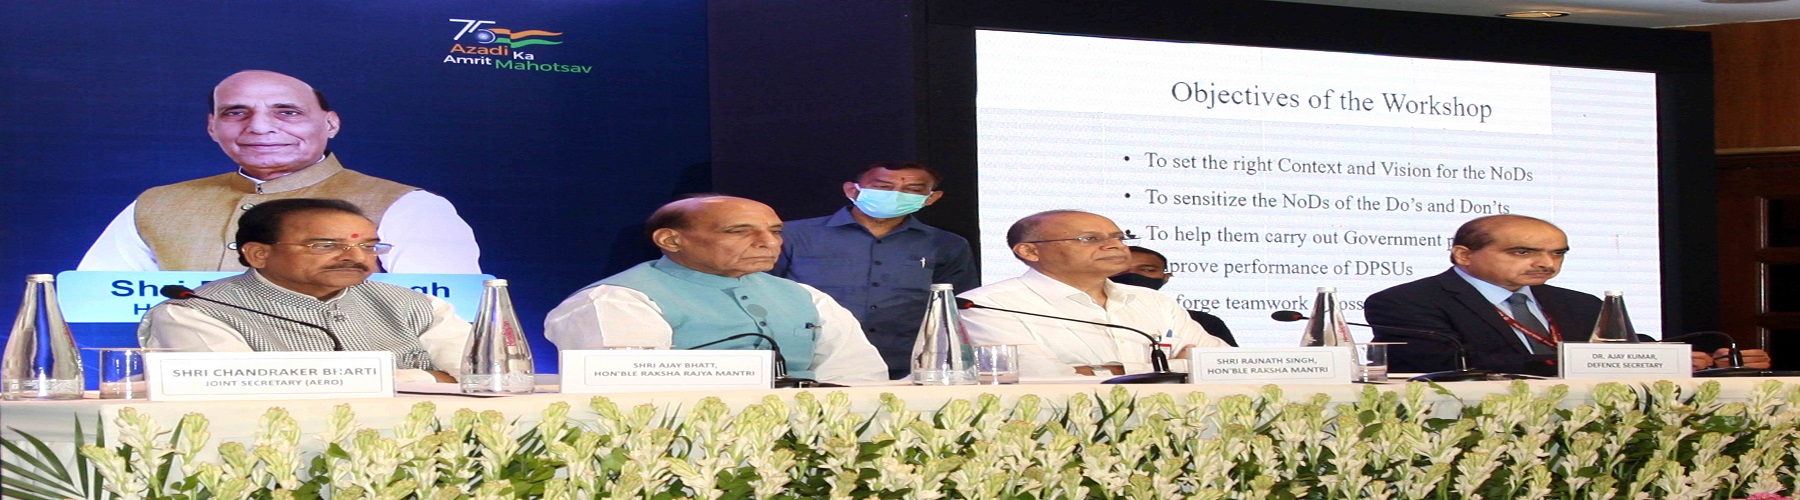 Raksha Mantri Shri Rajnath Singh inaugurating the workshop for CMDs and Non-Official Directors of Defence Public Sector Undertakings organised by Department of Defence Production in New Delhi on July 13, 2022. Also seen are Raksha Rajya Mantri Shri Ajay B